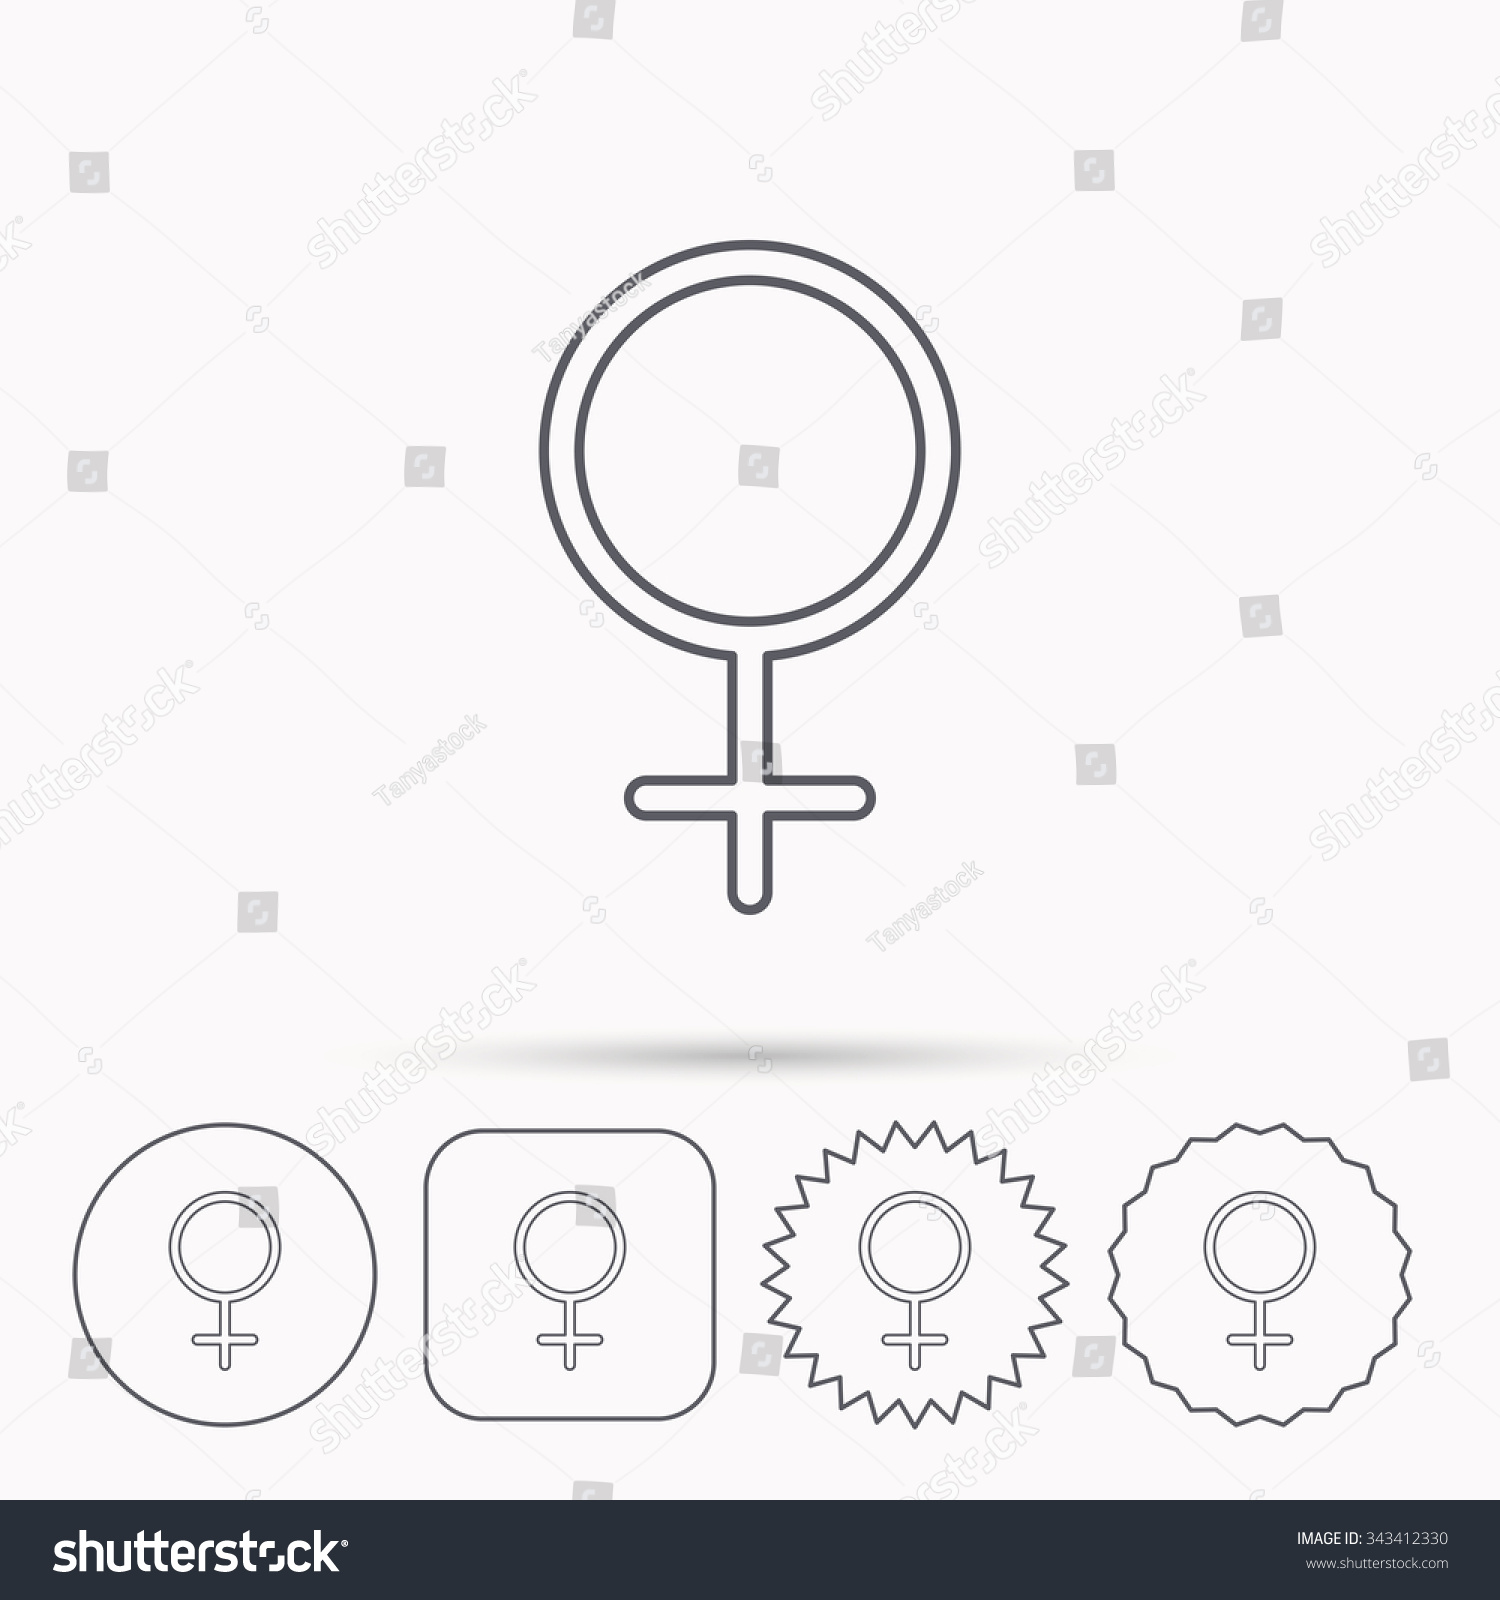 Female Icon Women Sex Sign Linear Stock Vector Royalty Free 343412330 Shutterstock 2132